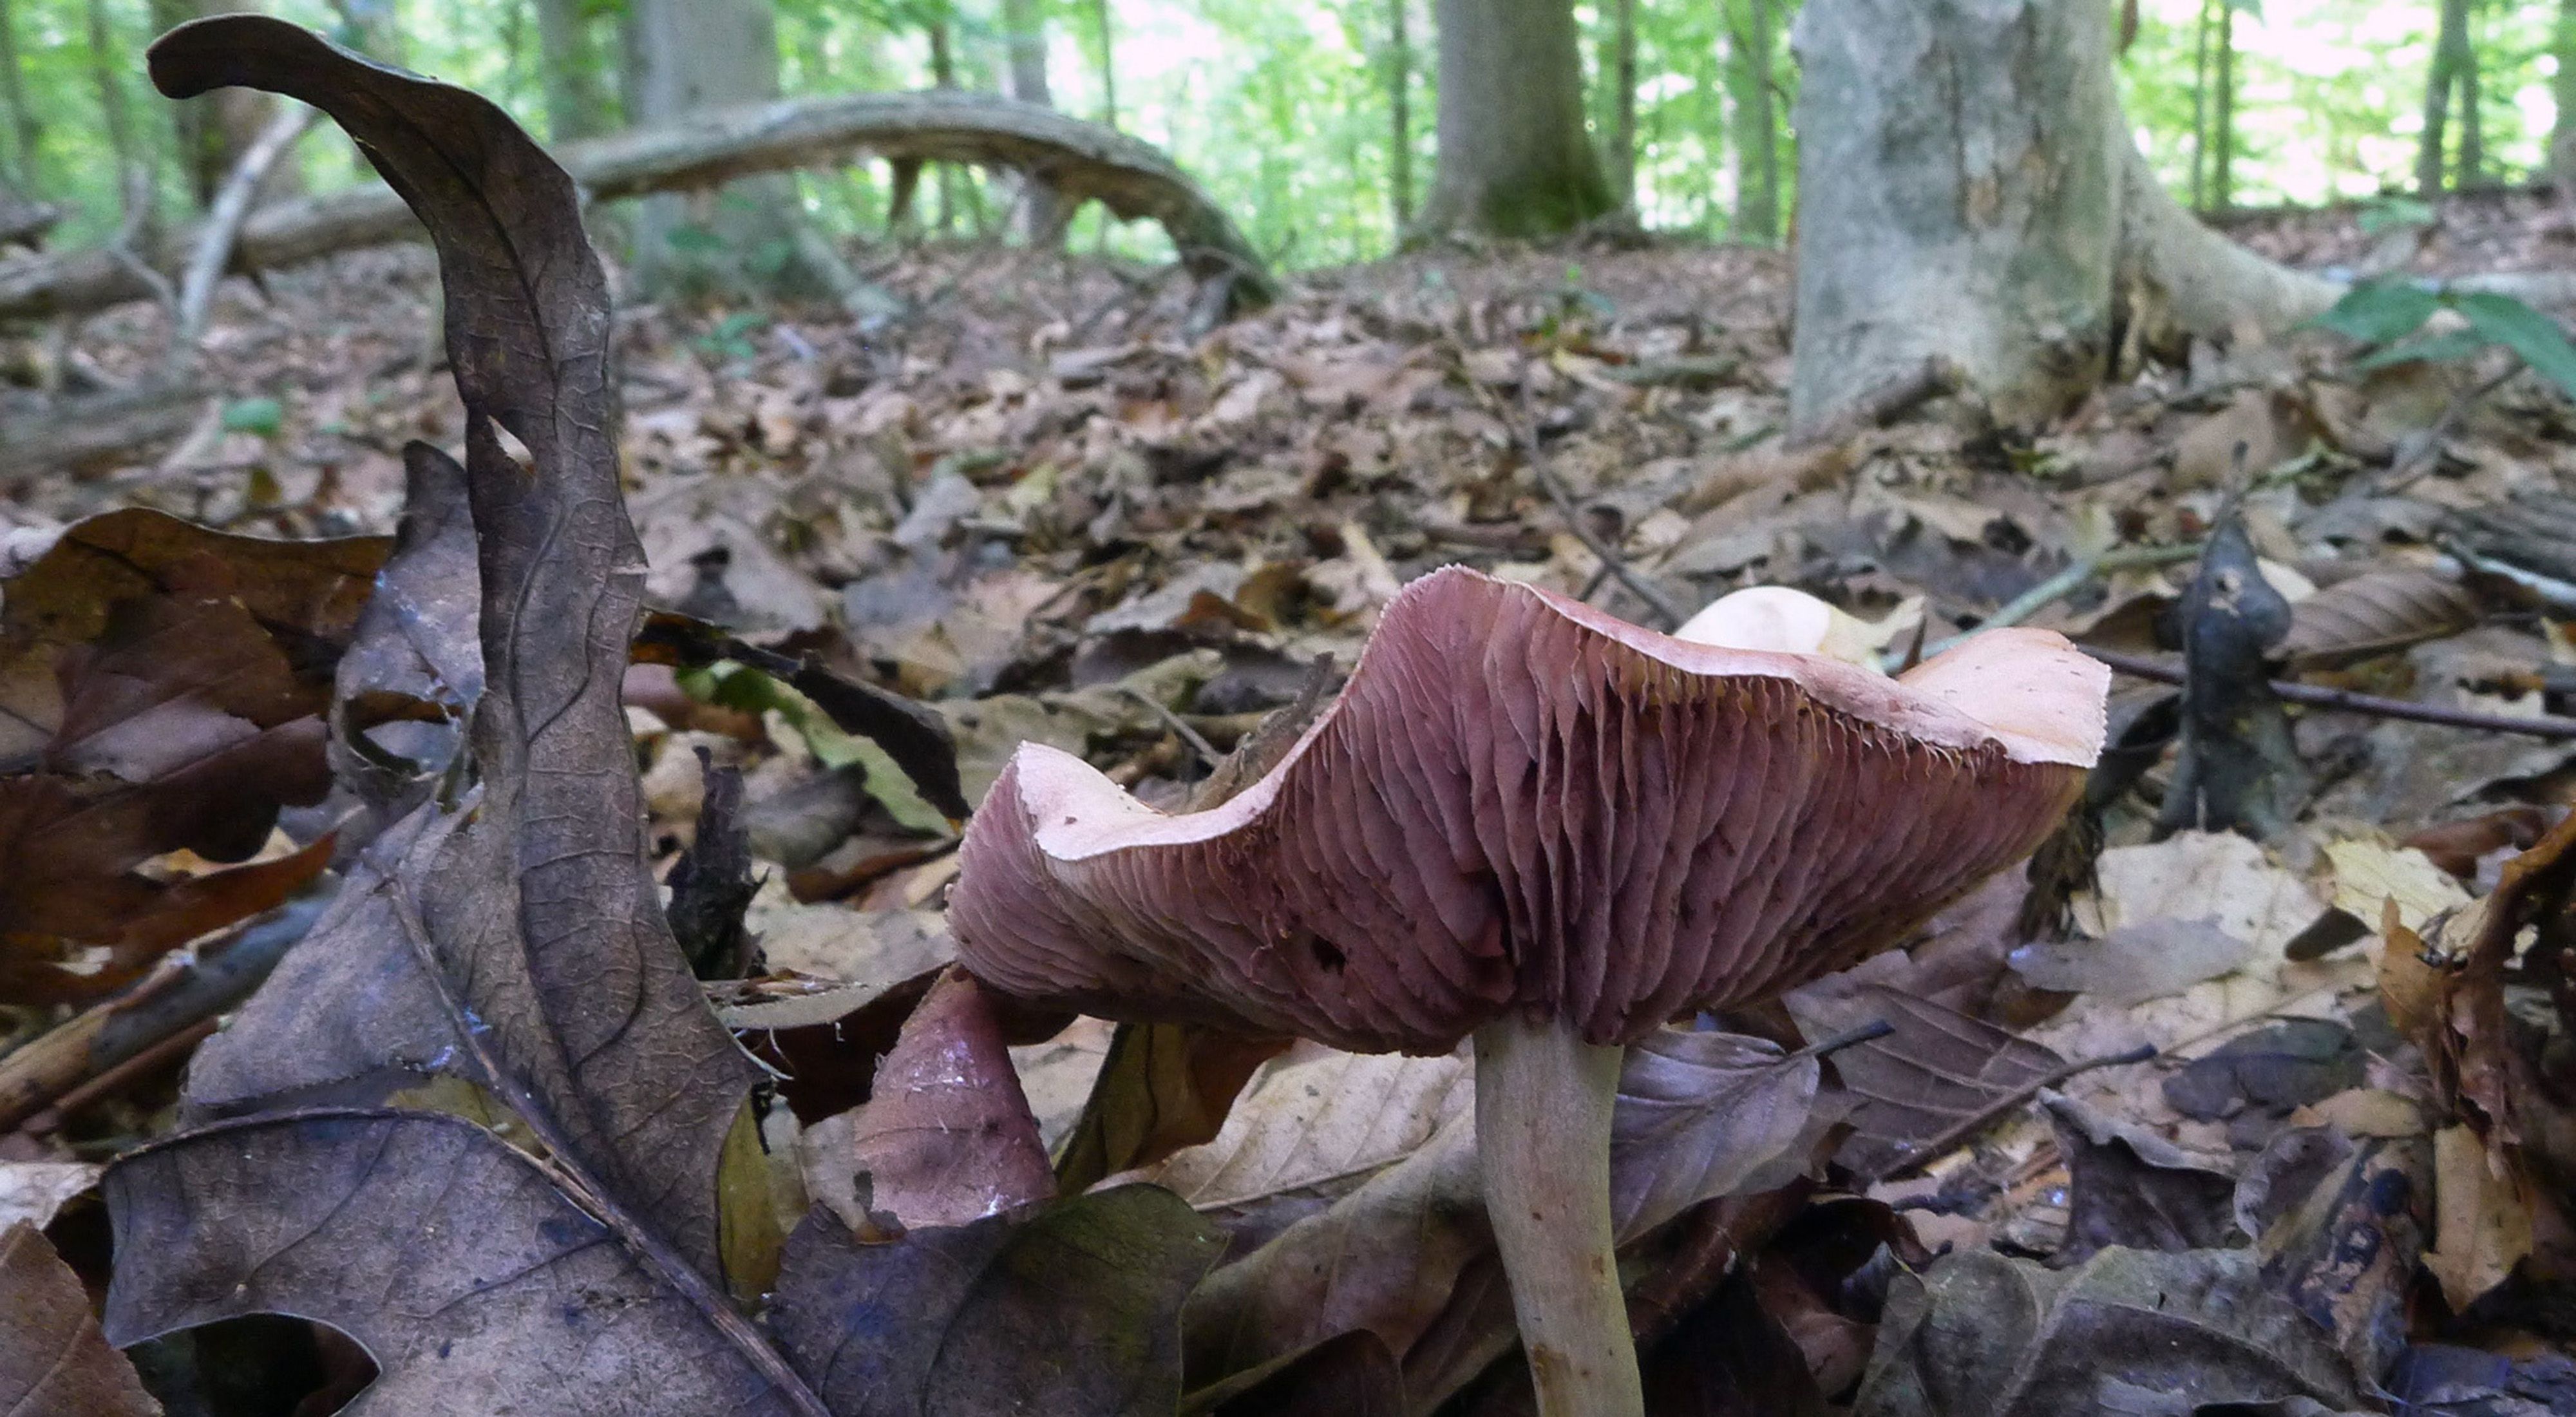 A low angle view from the forest floor looking up at the underside of a large pinkish mushroom.  The ground is covered in leaves. Thick tree trunks are seen in the background.